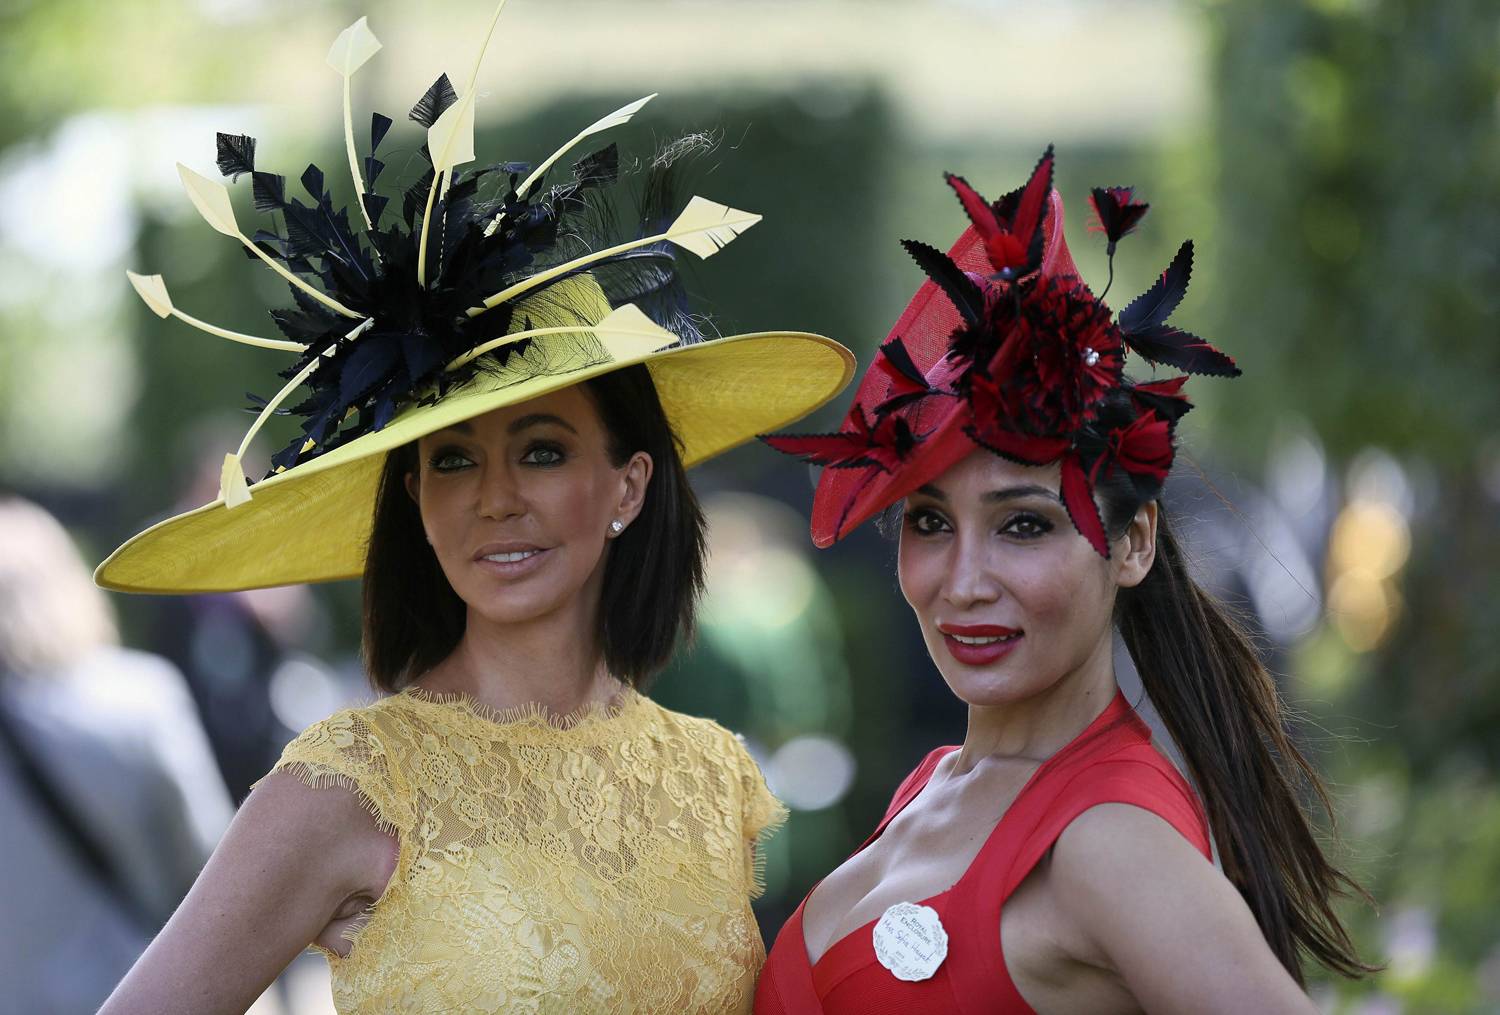 Racegoers pose on the first day of the Royal Ascot horse racing festival at Ascot, June 17, 2014.